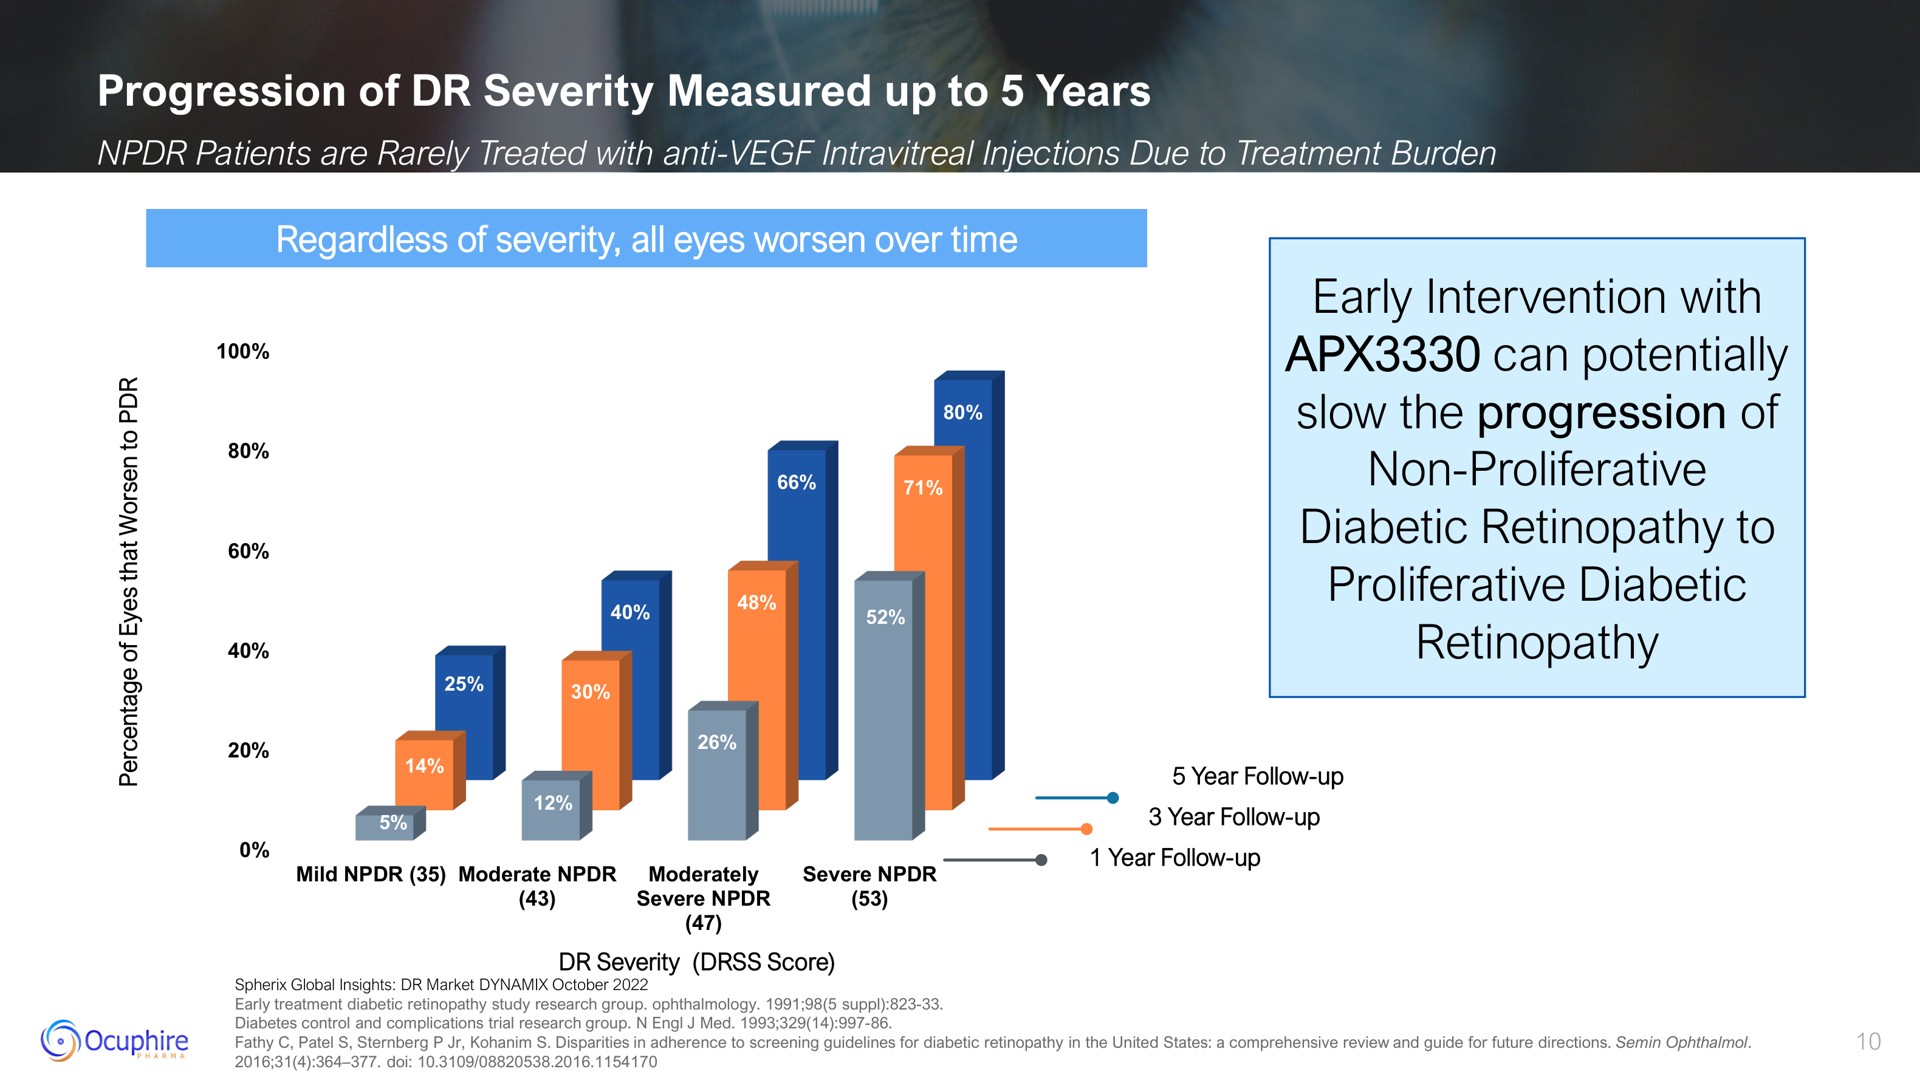 progression of severity measured up to years early intervention with can potentially slow the progression of non proliferative diabetic to proliferative diabetic a | Ocuphire Pharma